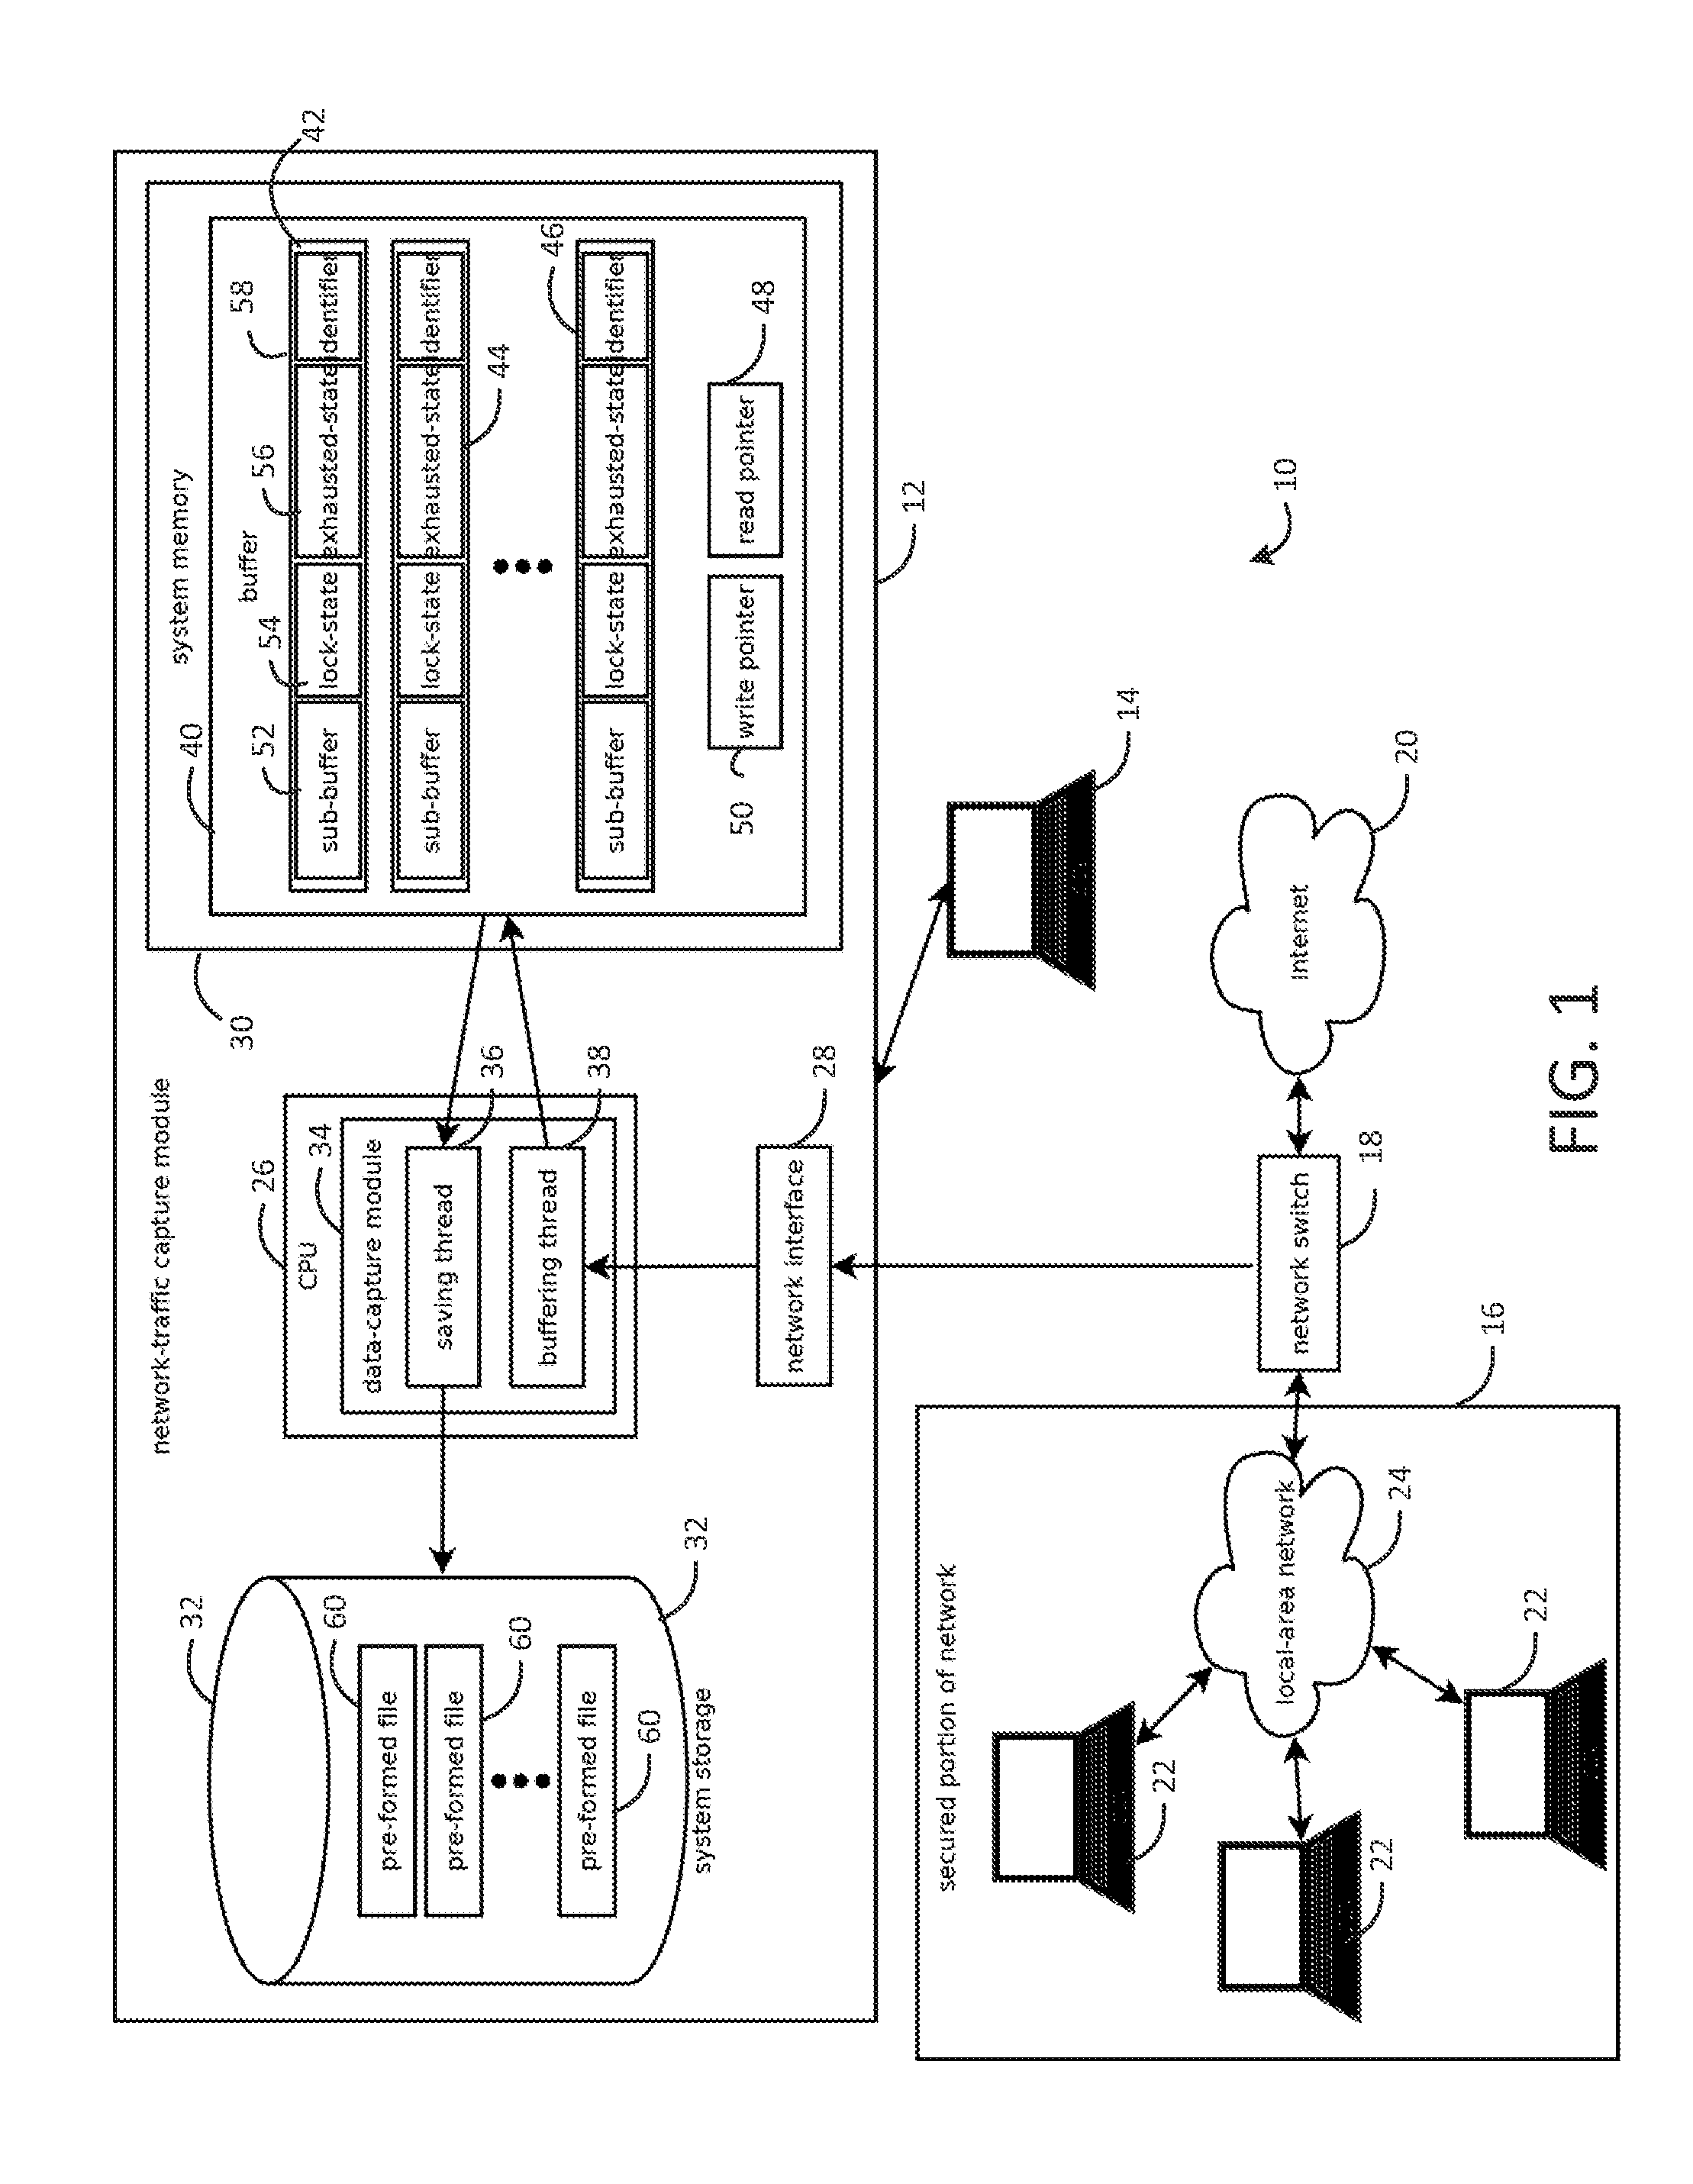 Systems and methods for capturing or analyzing time-series data